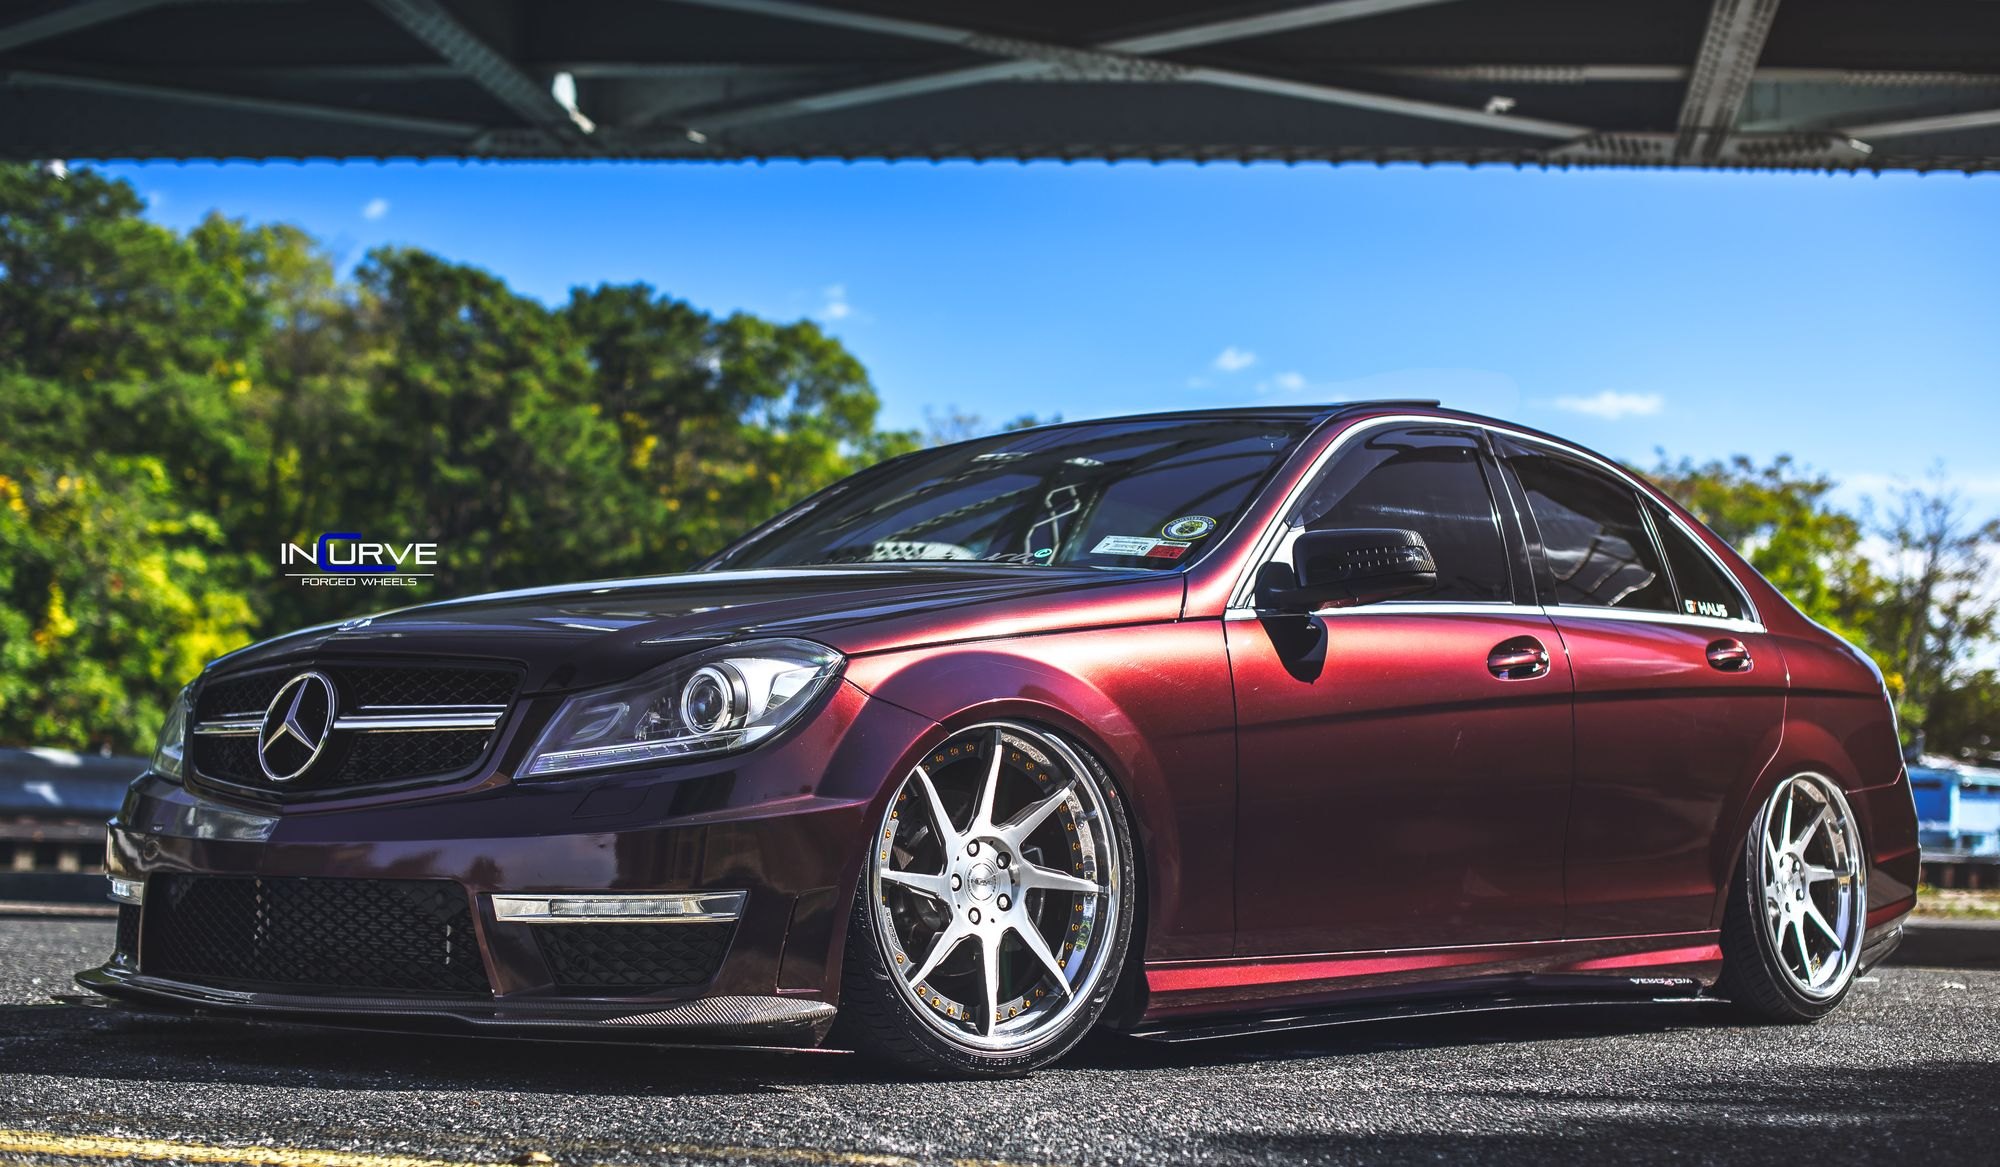 Aftermarket Halo Headlights on Red Mercedes C Class - Photo by Incurve Wheels